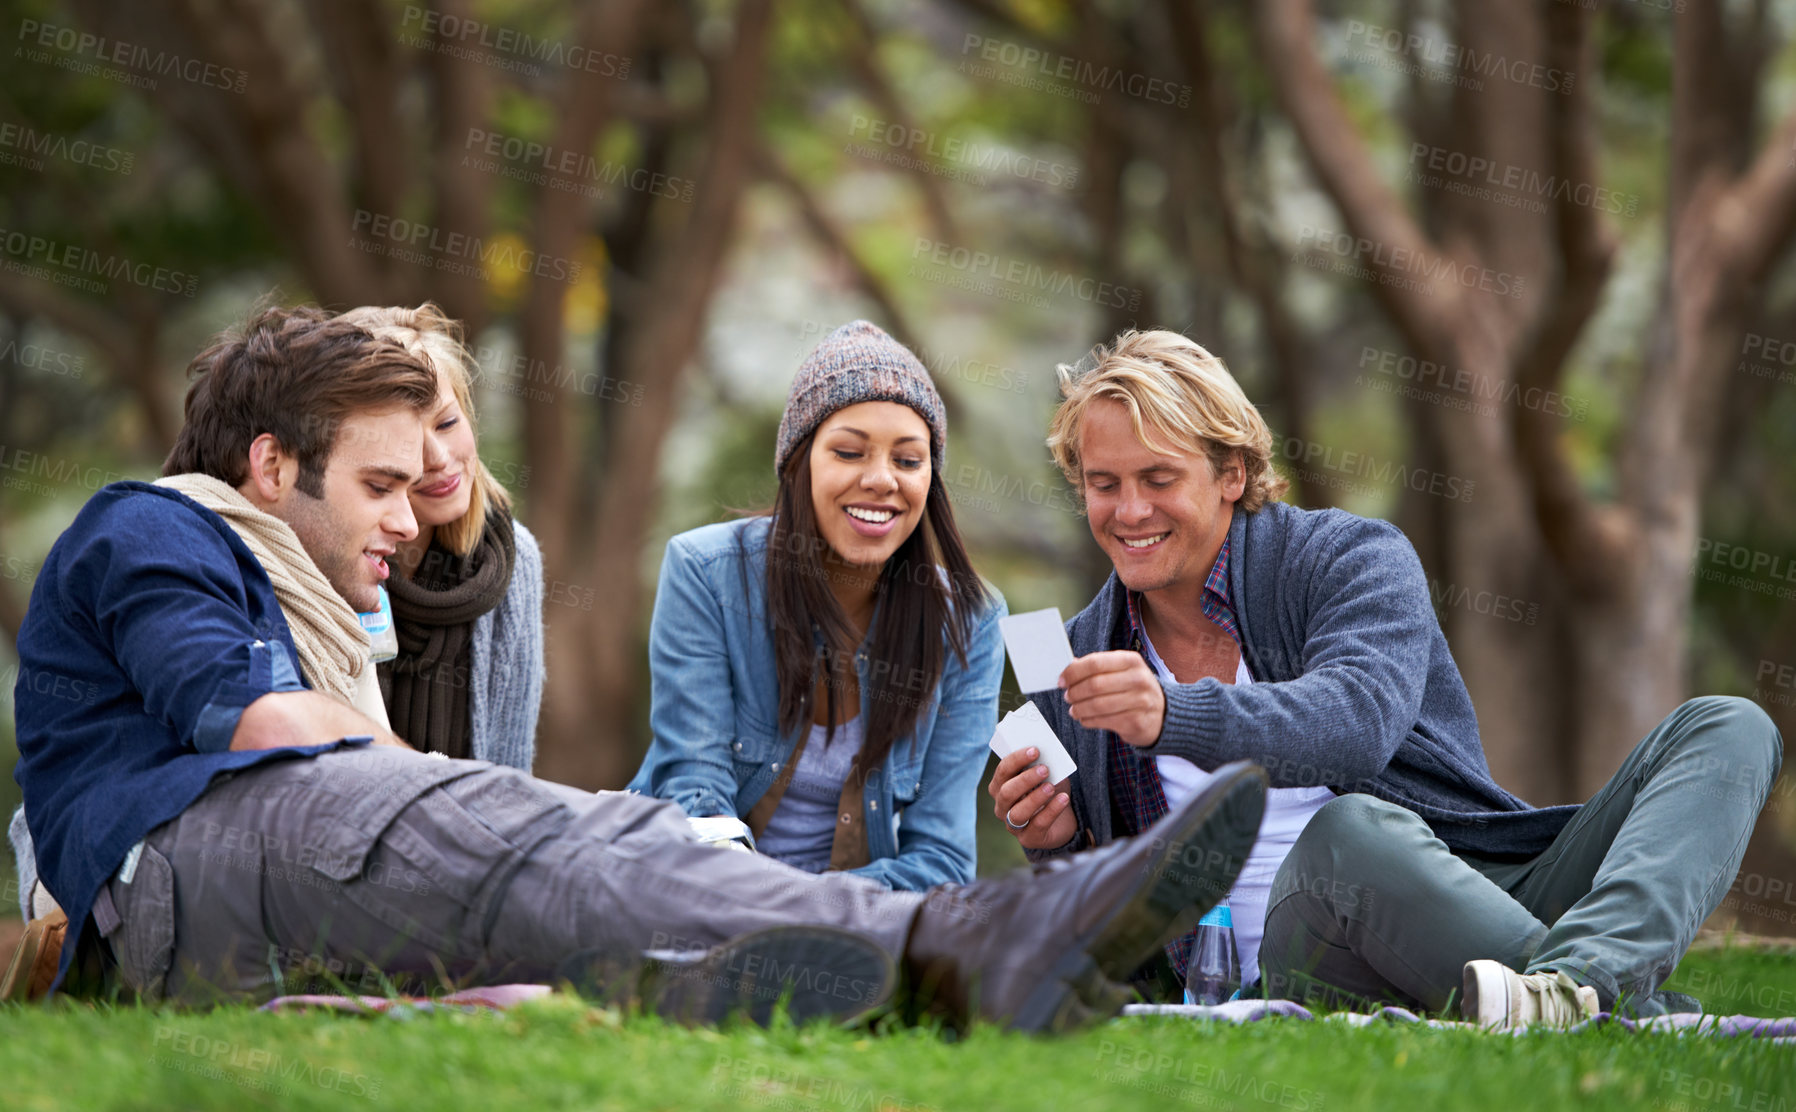 Buy stock photo A group of friends enjoying an outdoor picnic together